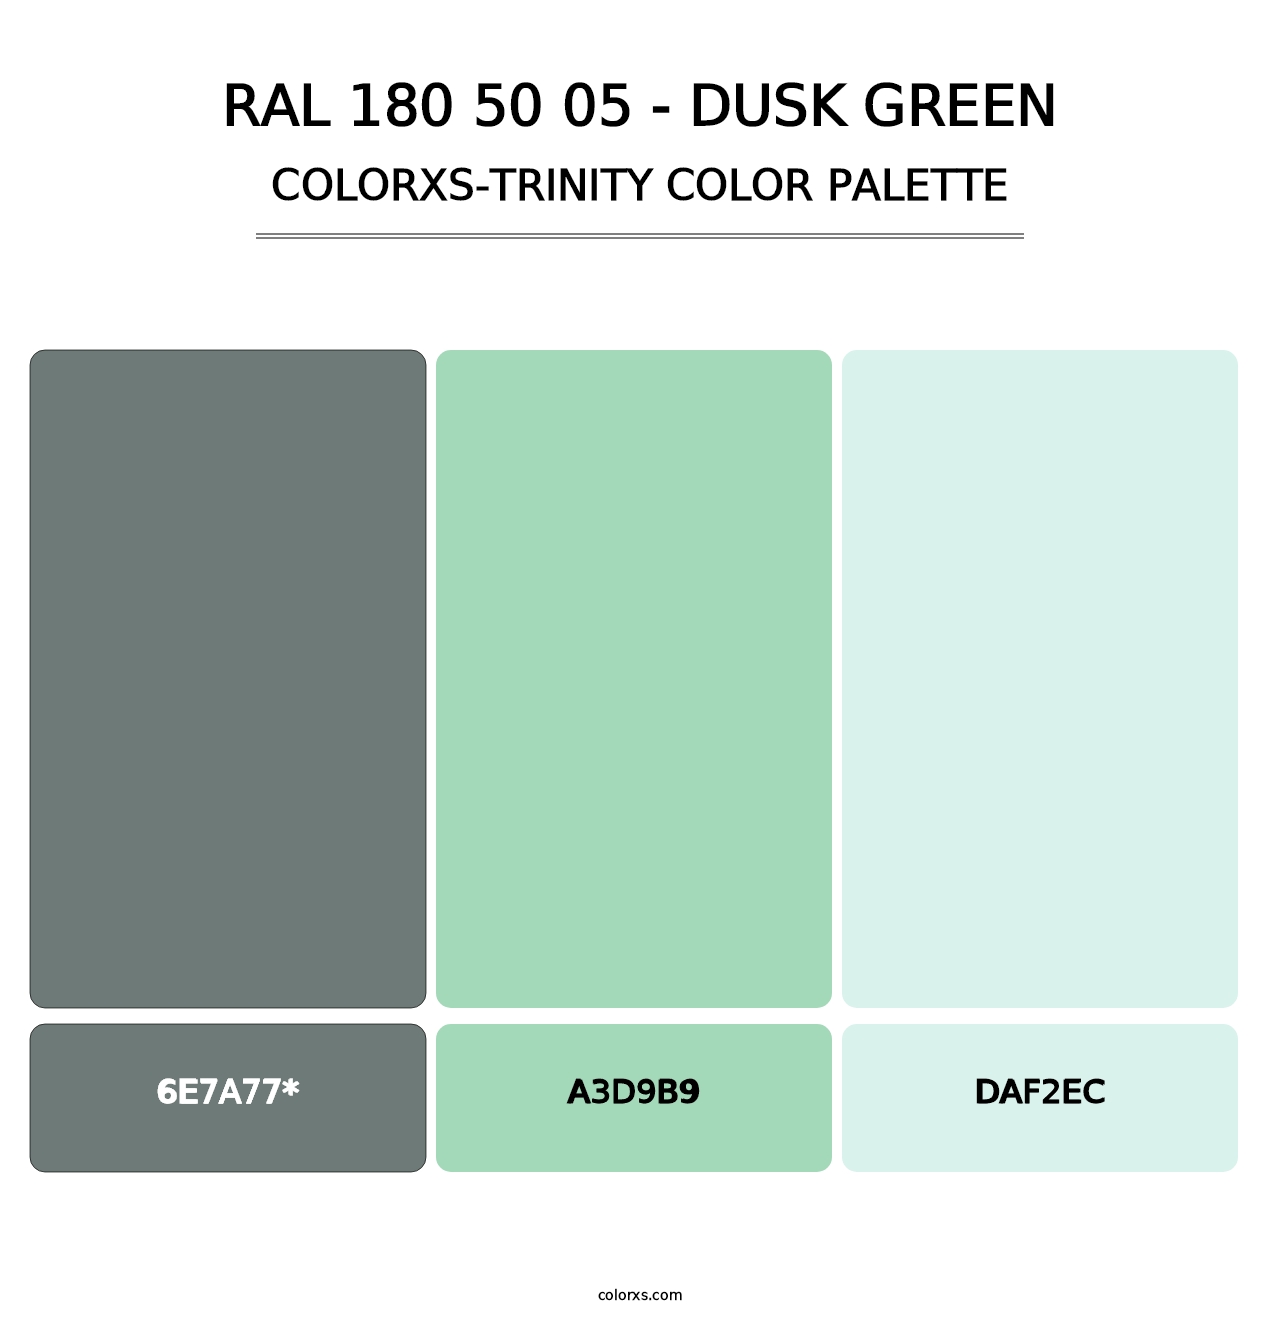 RAL 180 50 05 - Dusk Green - Colorxs Trinity Palette